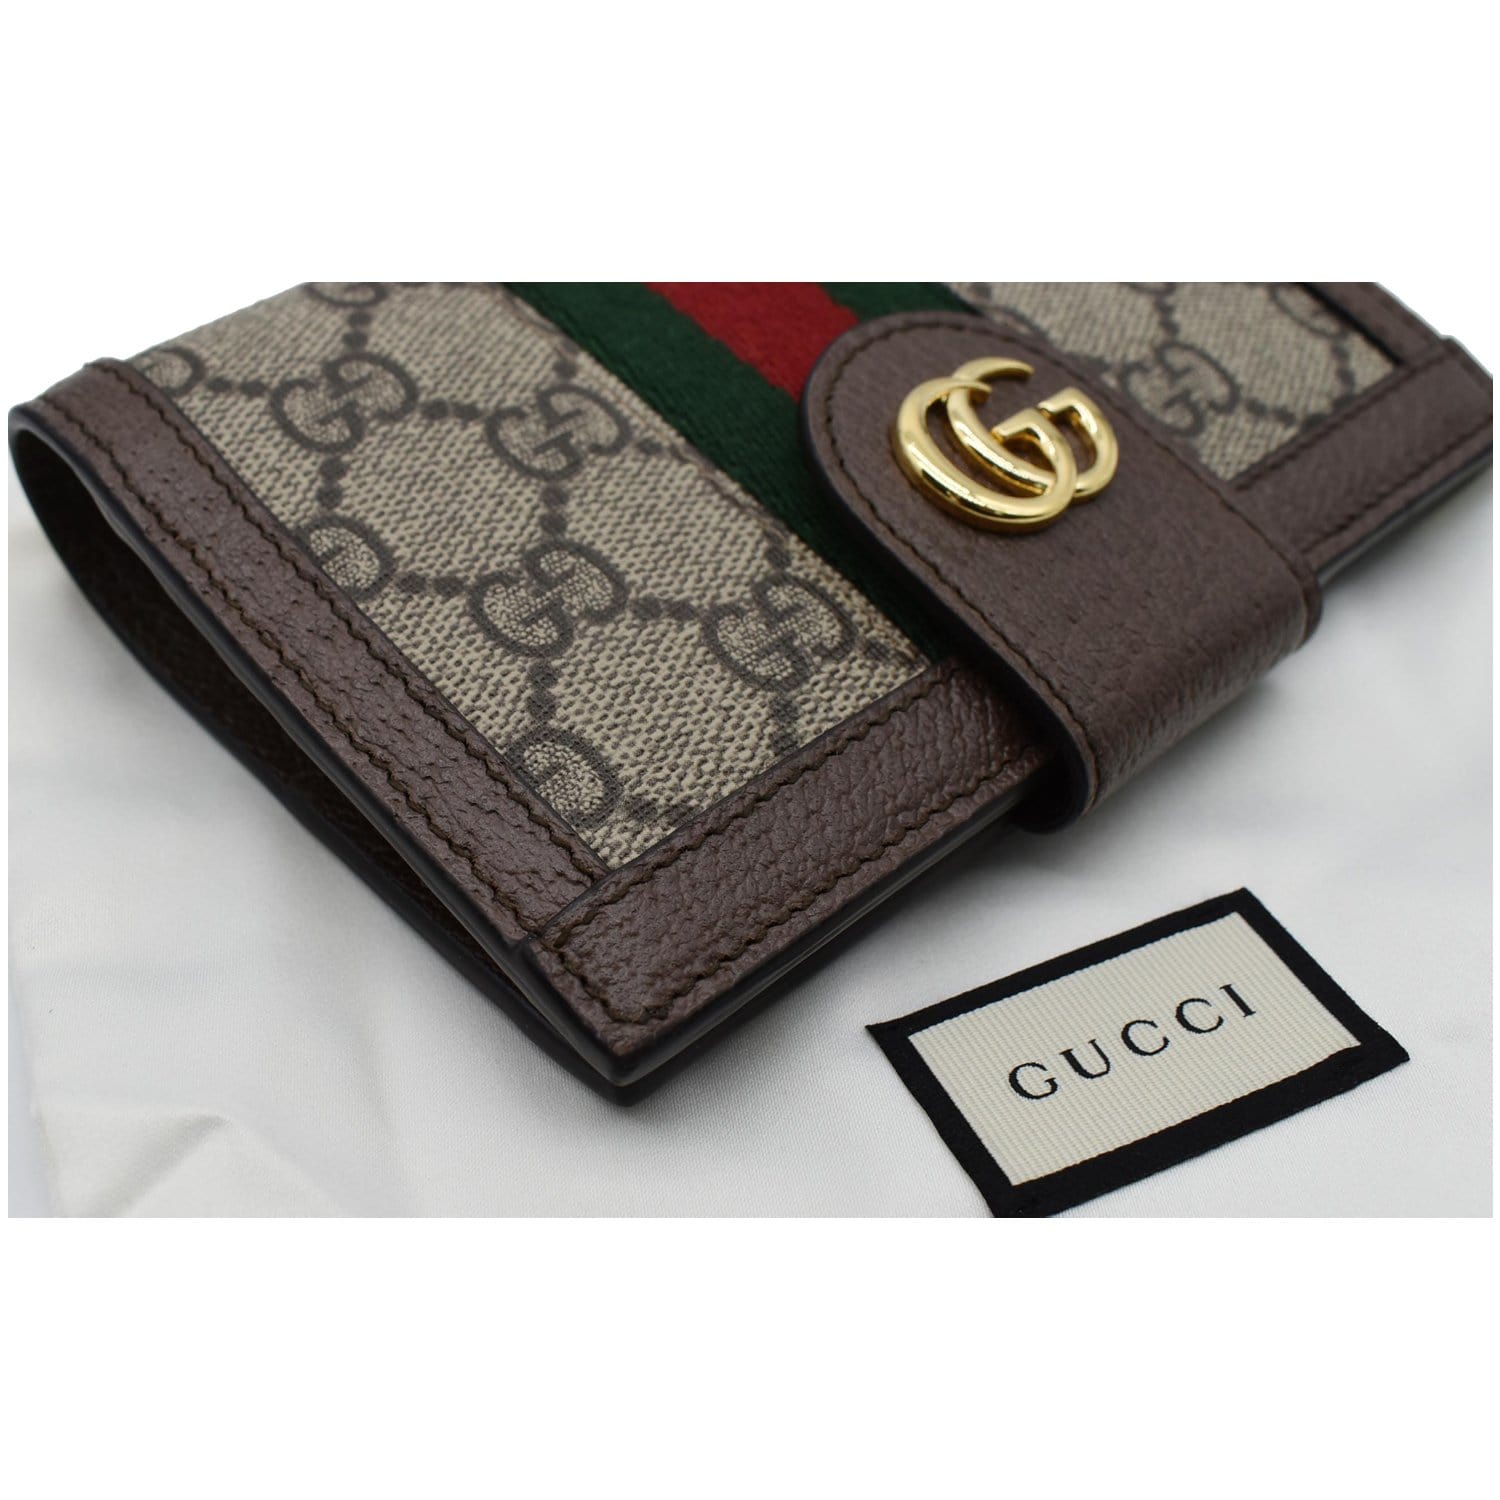 Gucci Ophidia GG card Case Wallet Authentic New! $495